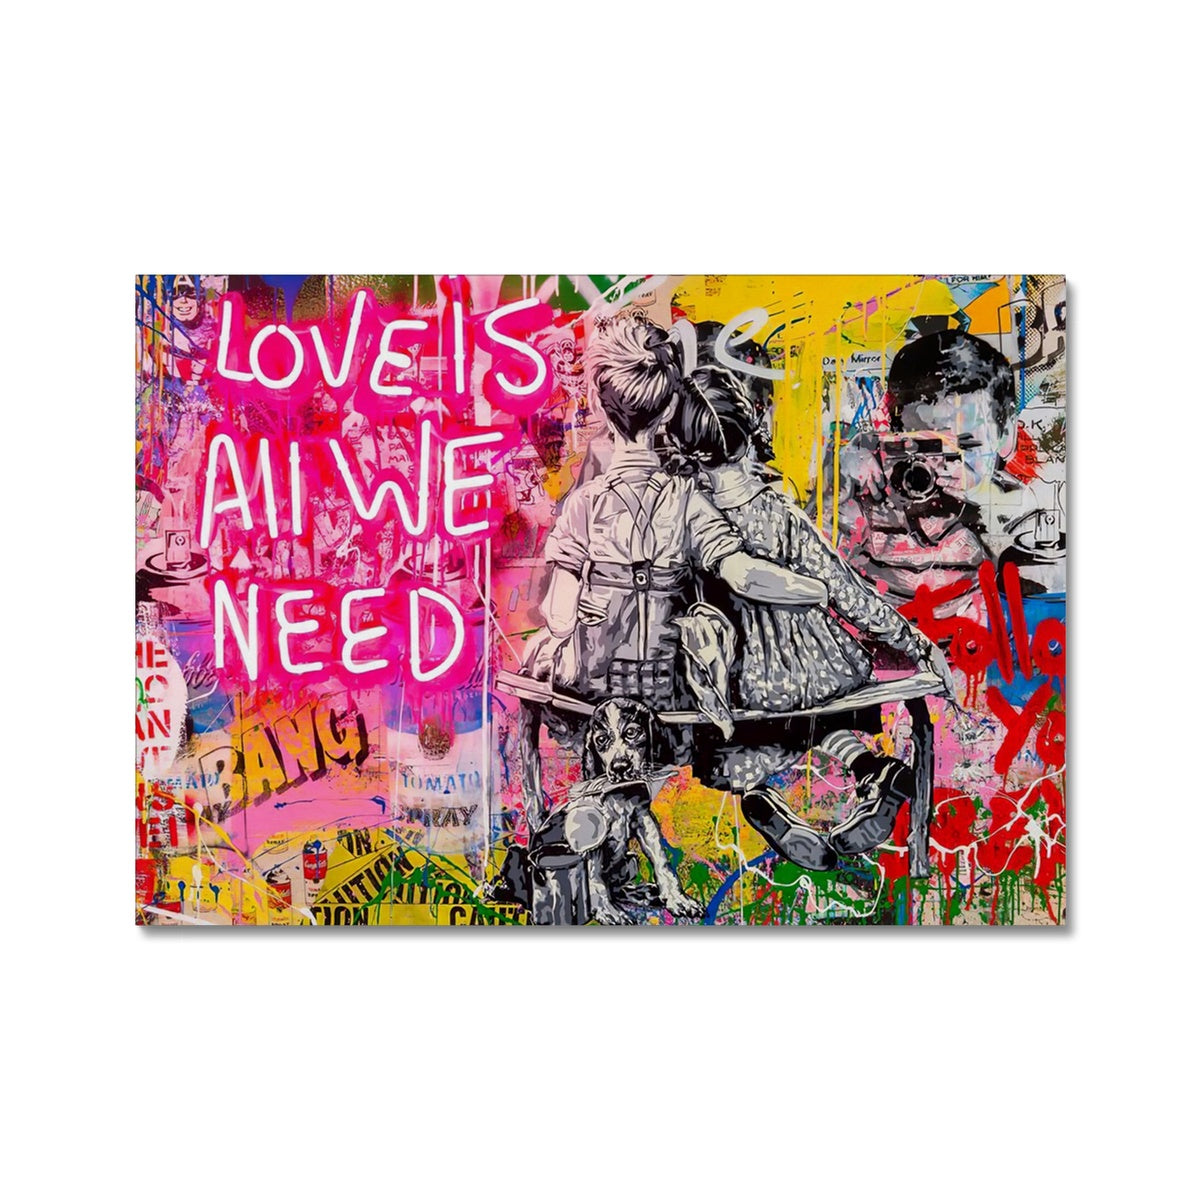 Love is all we need - Framed canvas